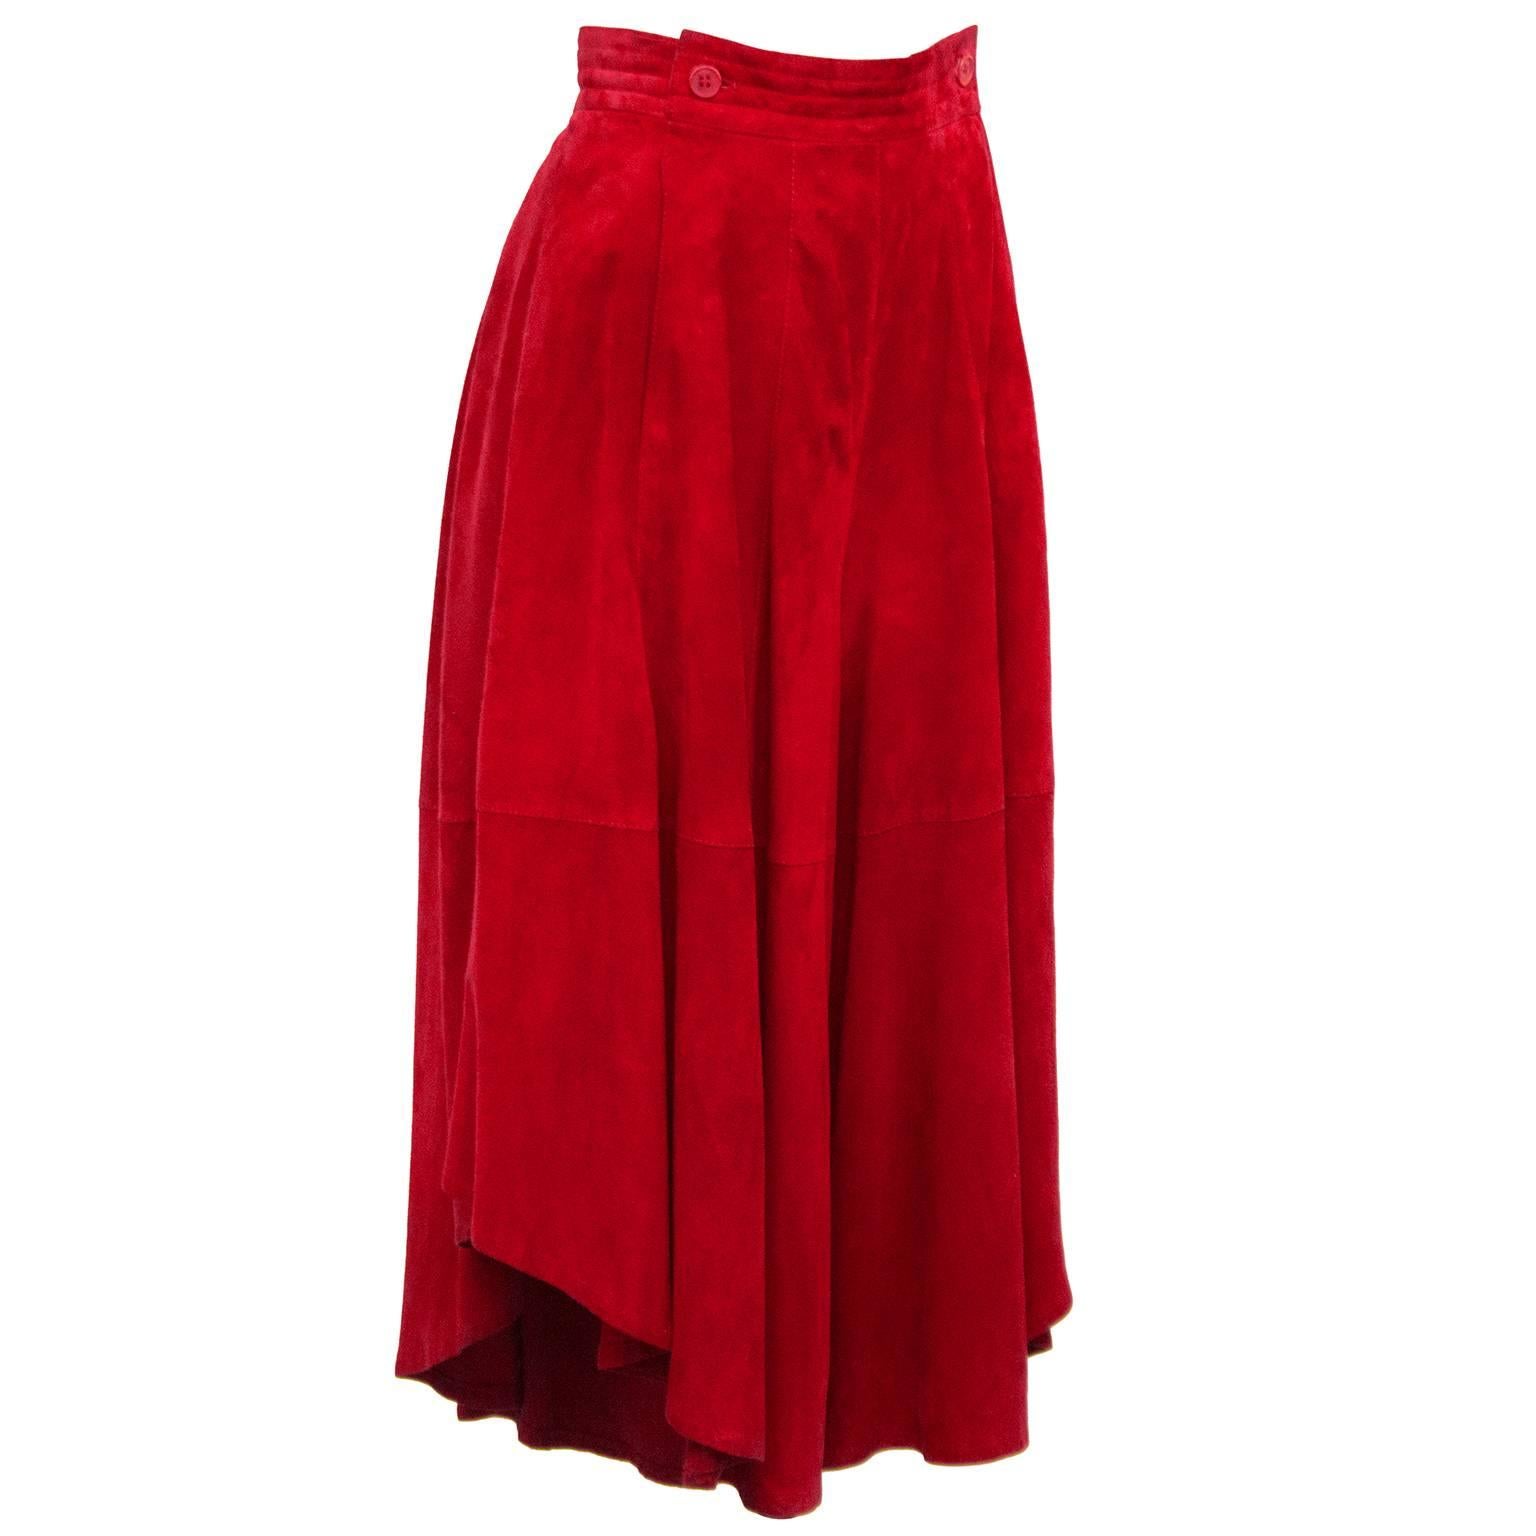 1980s red Gianfranco Ferre suede culottes. Slits up both legs to allow for draping to look like a skirt. Sailor fly with hidden zippers and two red buttons. Side slit pockets. Red viscose lining. Marked US size 4. Excellent vintage condition.

Waist